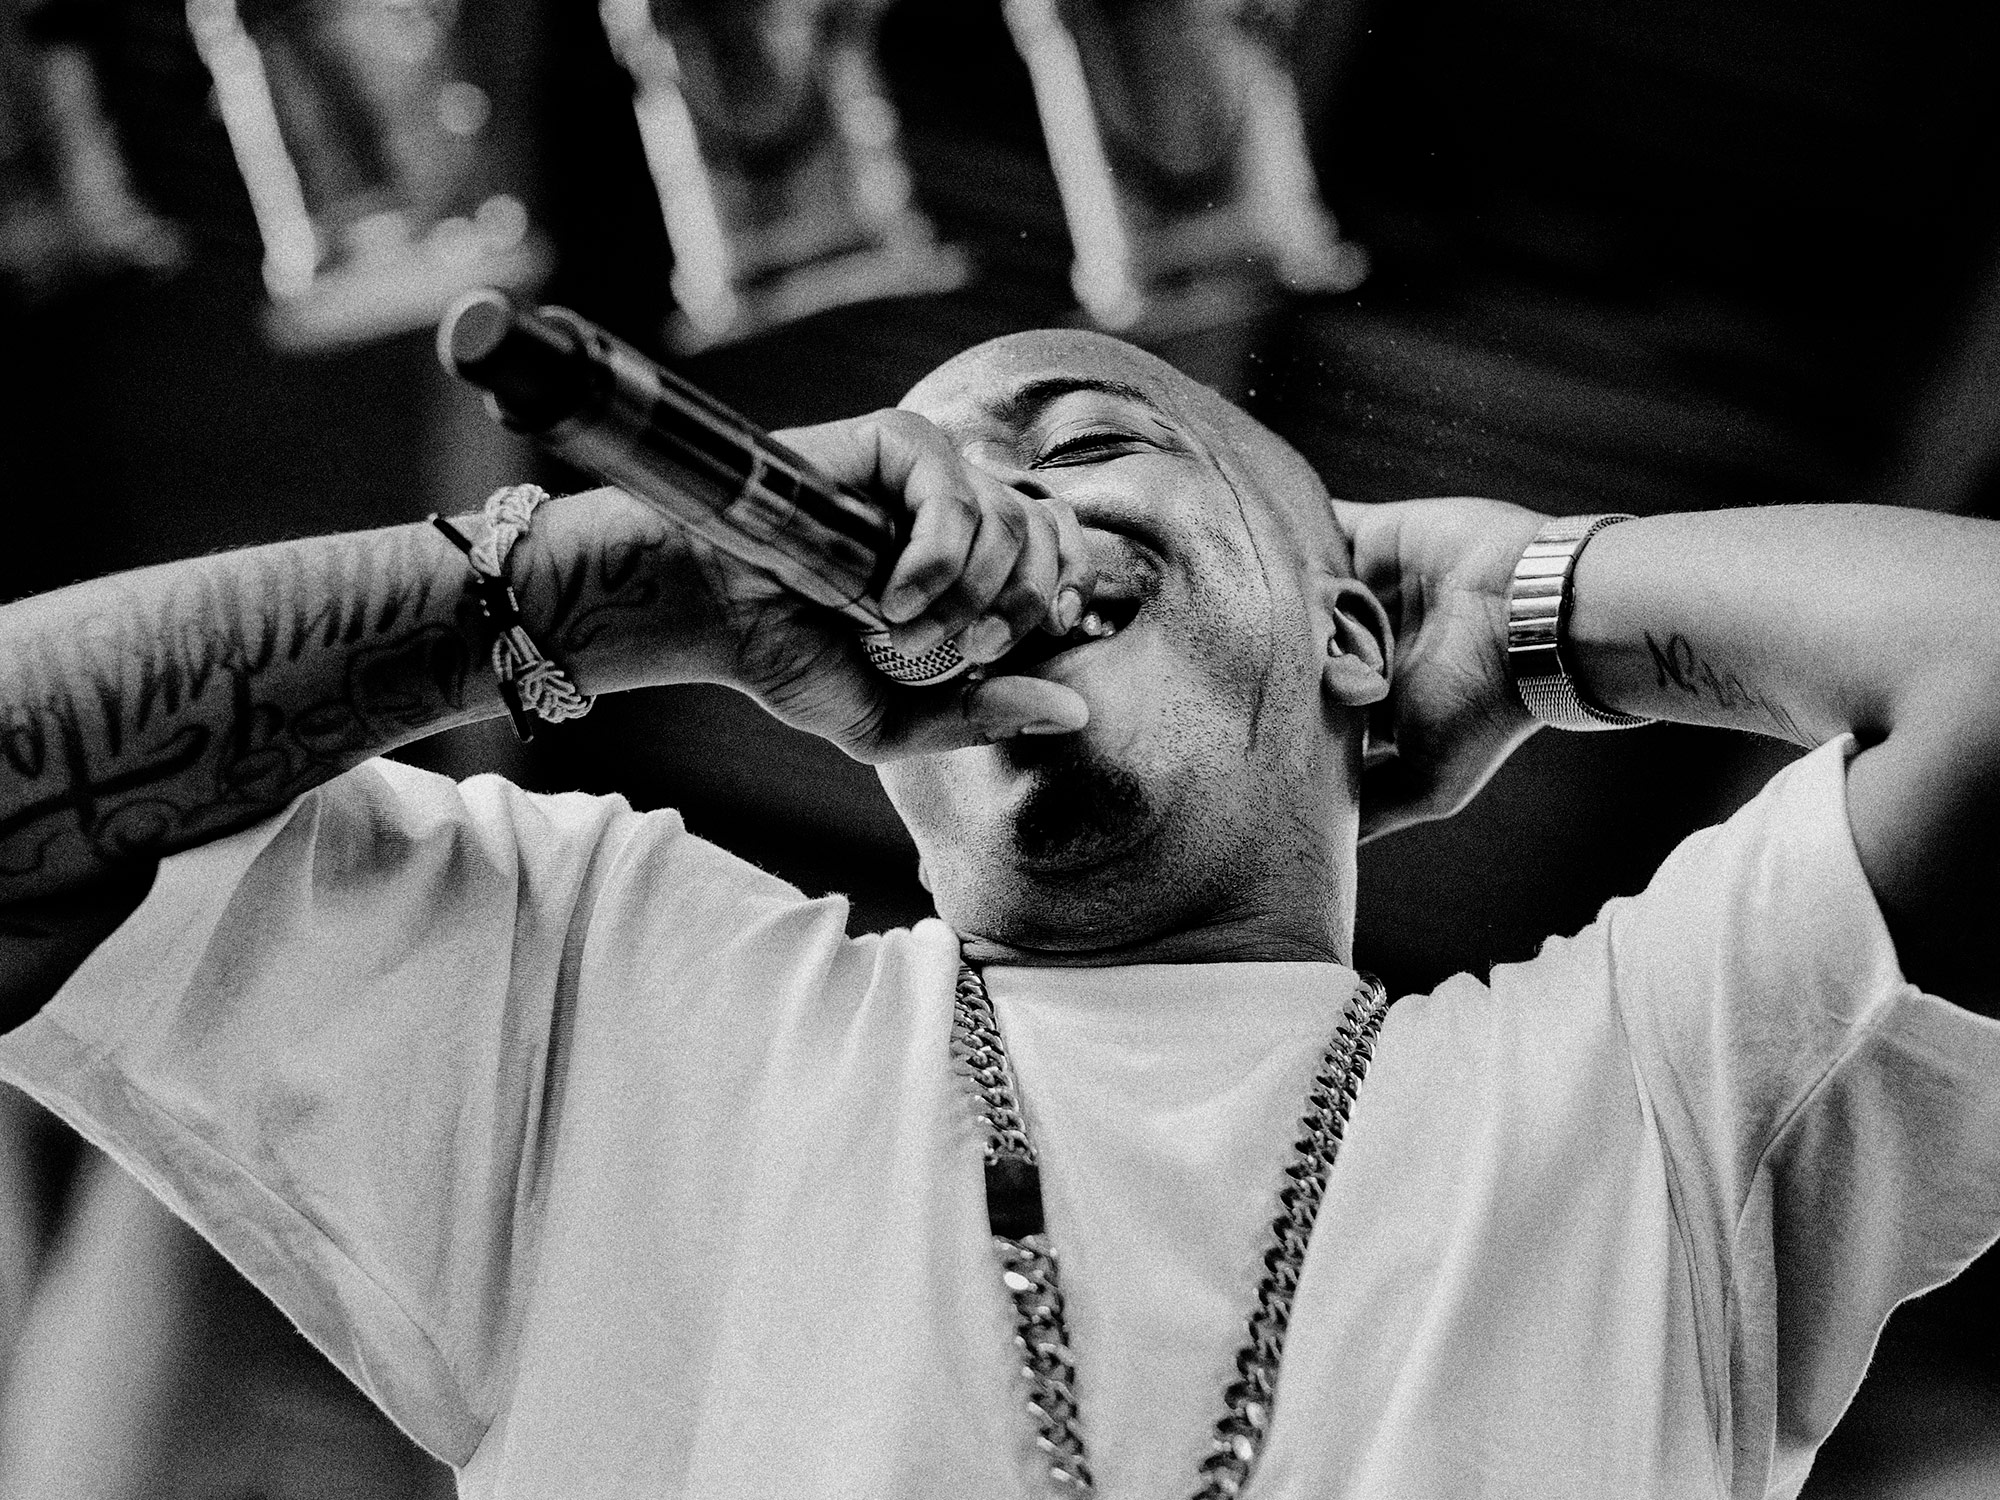 Doughbeezy, aka The Southeast Beast, Houston rapper, performs at Free Press Music Festival in Houston, Texas, photographed by Houston editorial and commercial photographer, Todd Spoth.